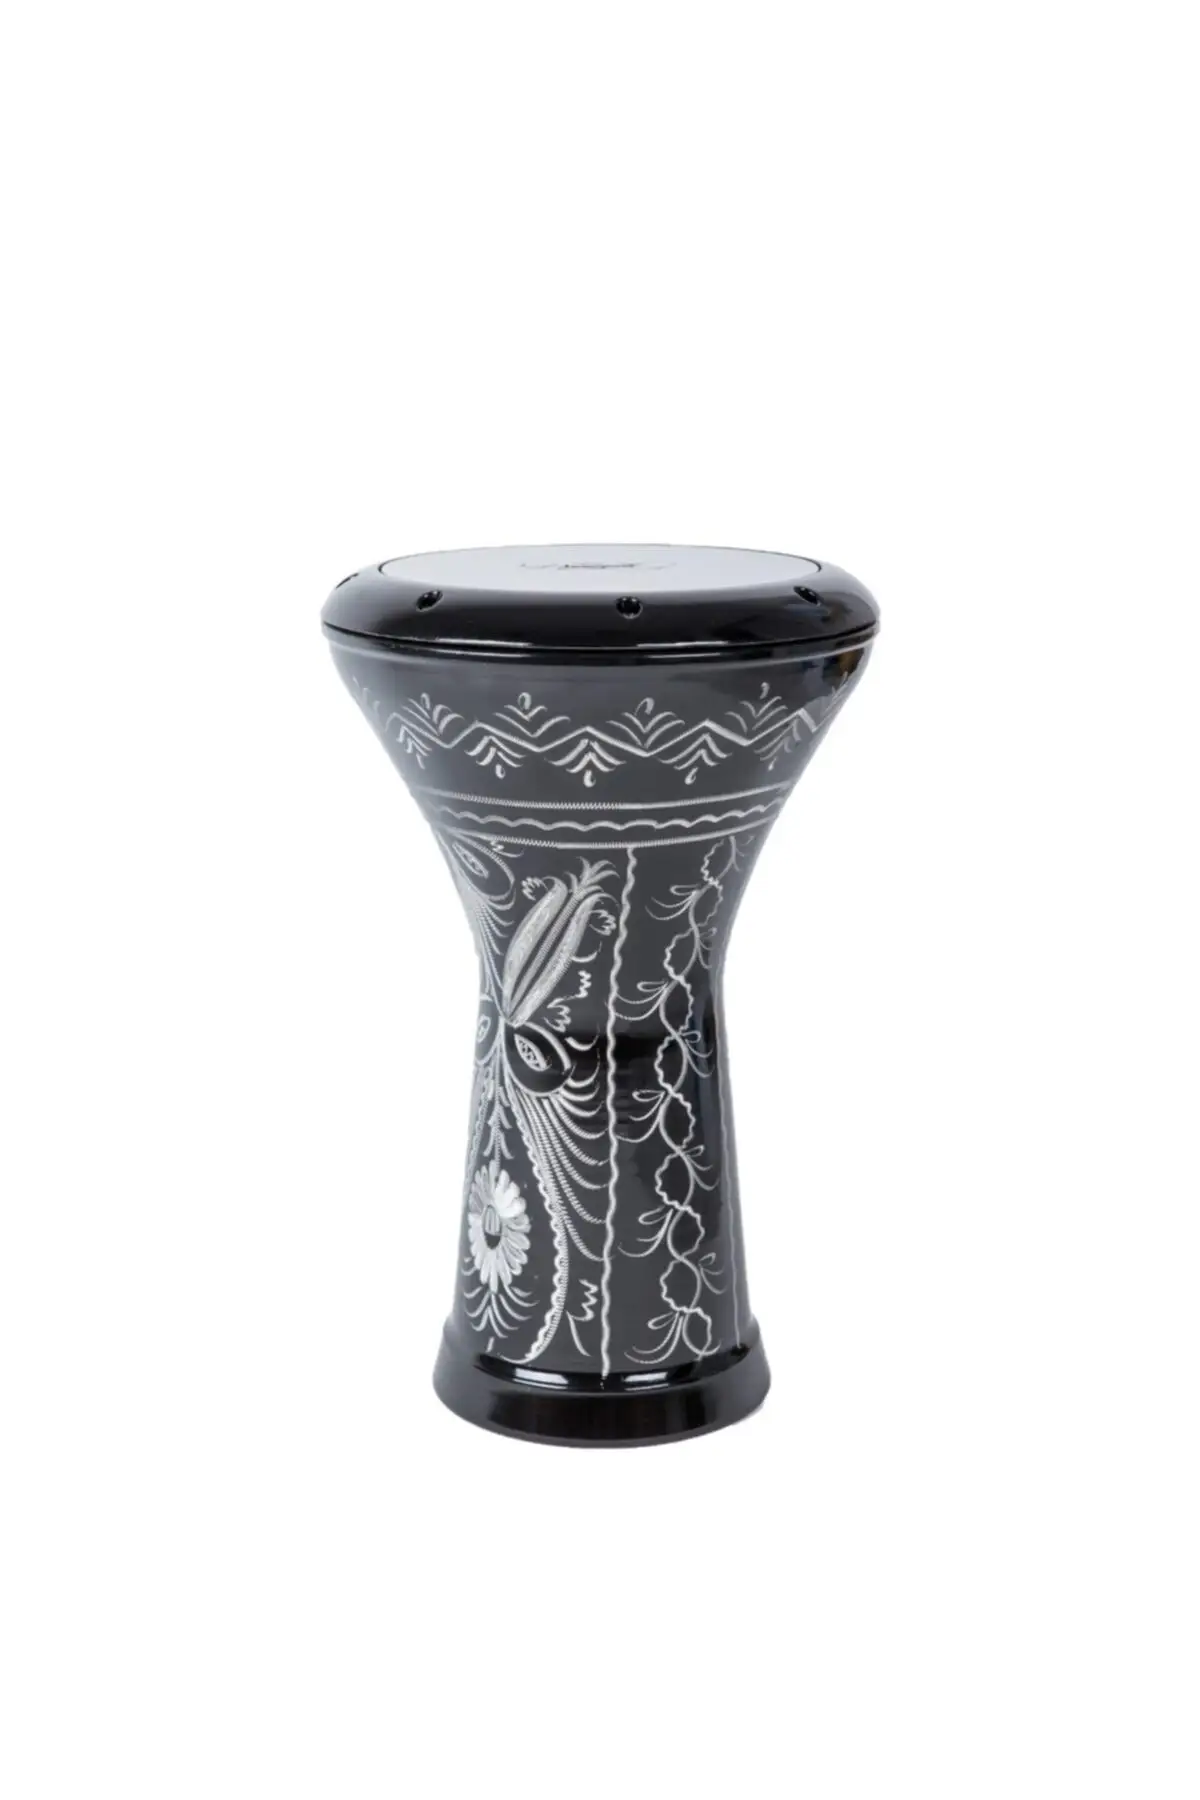 Egyptian Doumbek Darbuka Percussion Engraved Percussion Instrument Drum Instrument Turkey Production